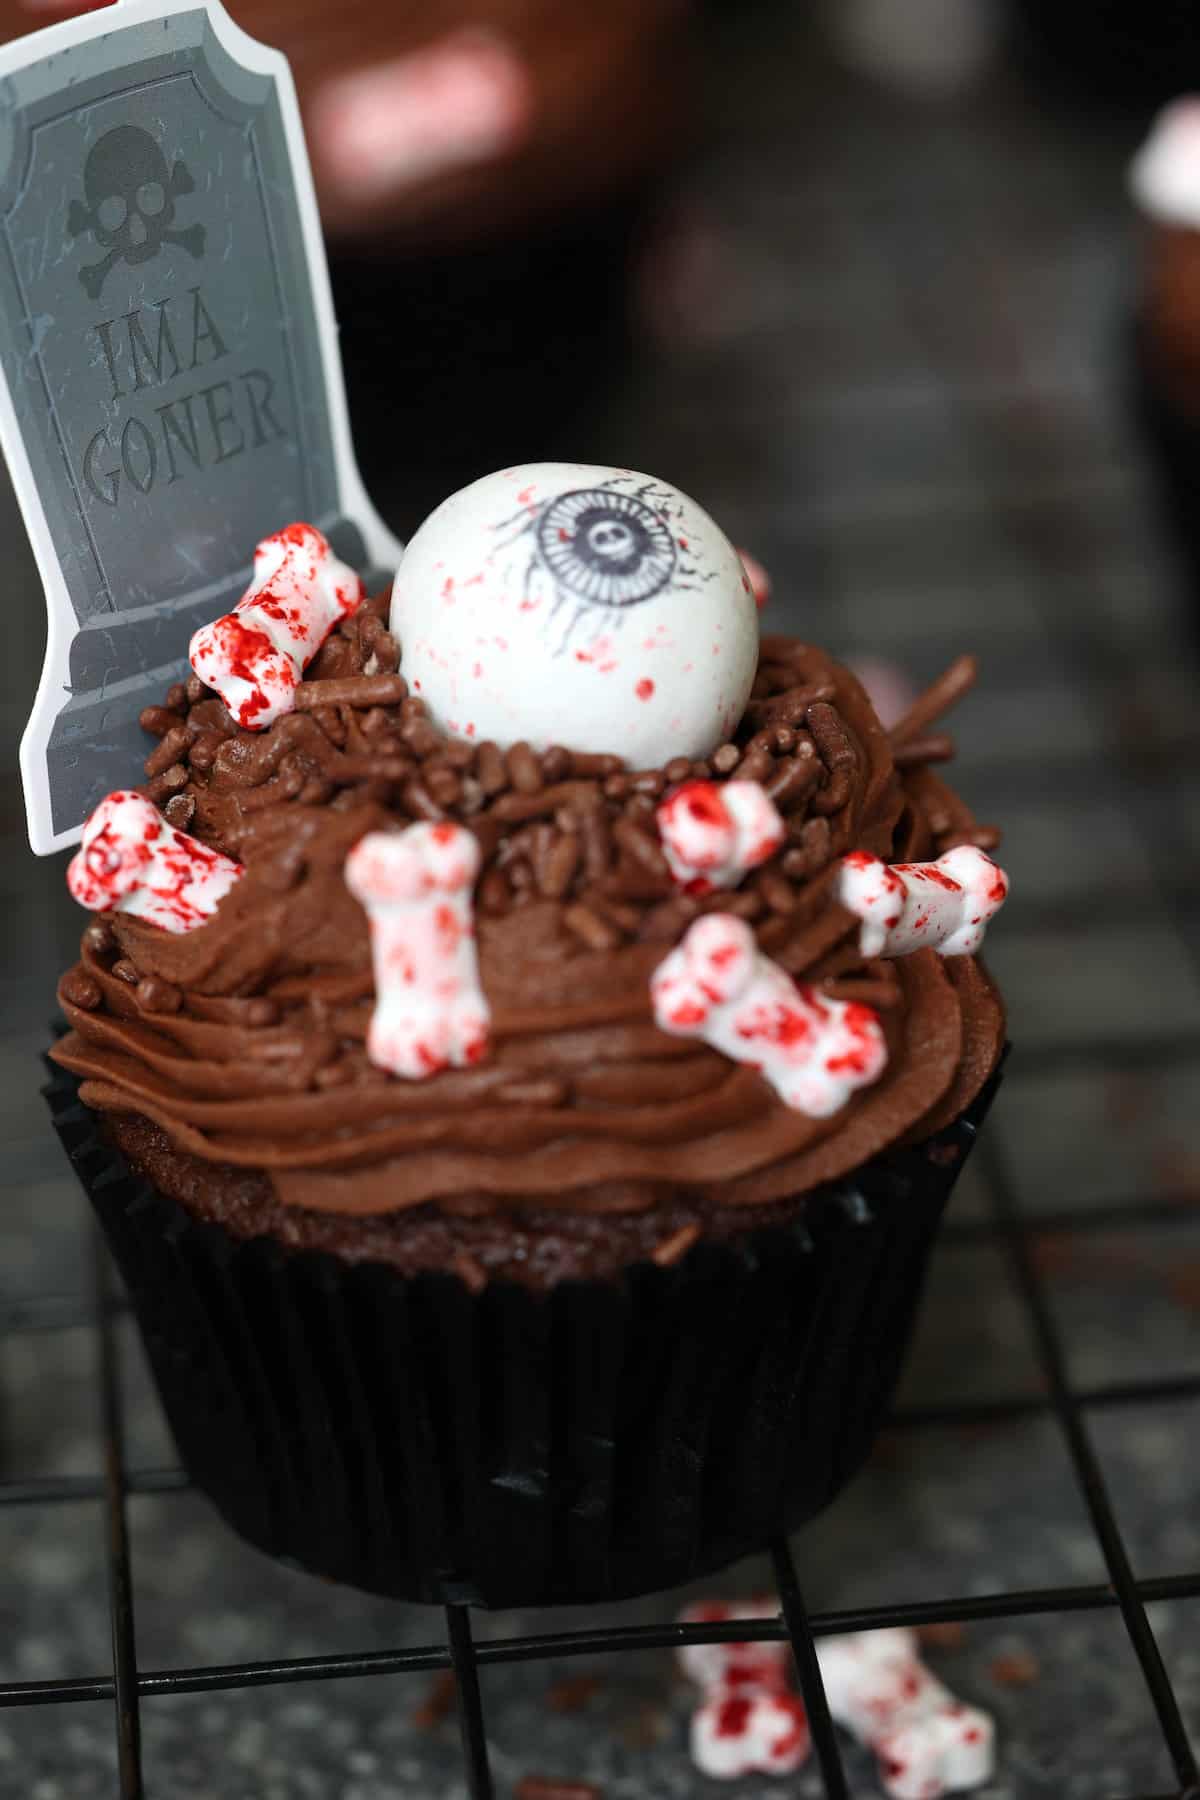 a chocolate cupcake with candy bones and a giant candy eyeball